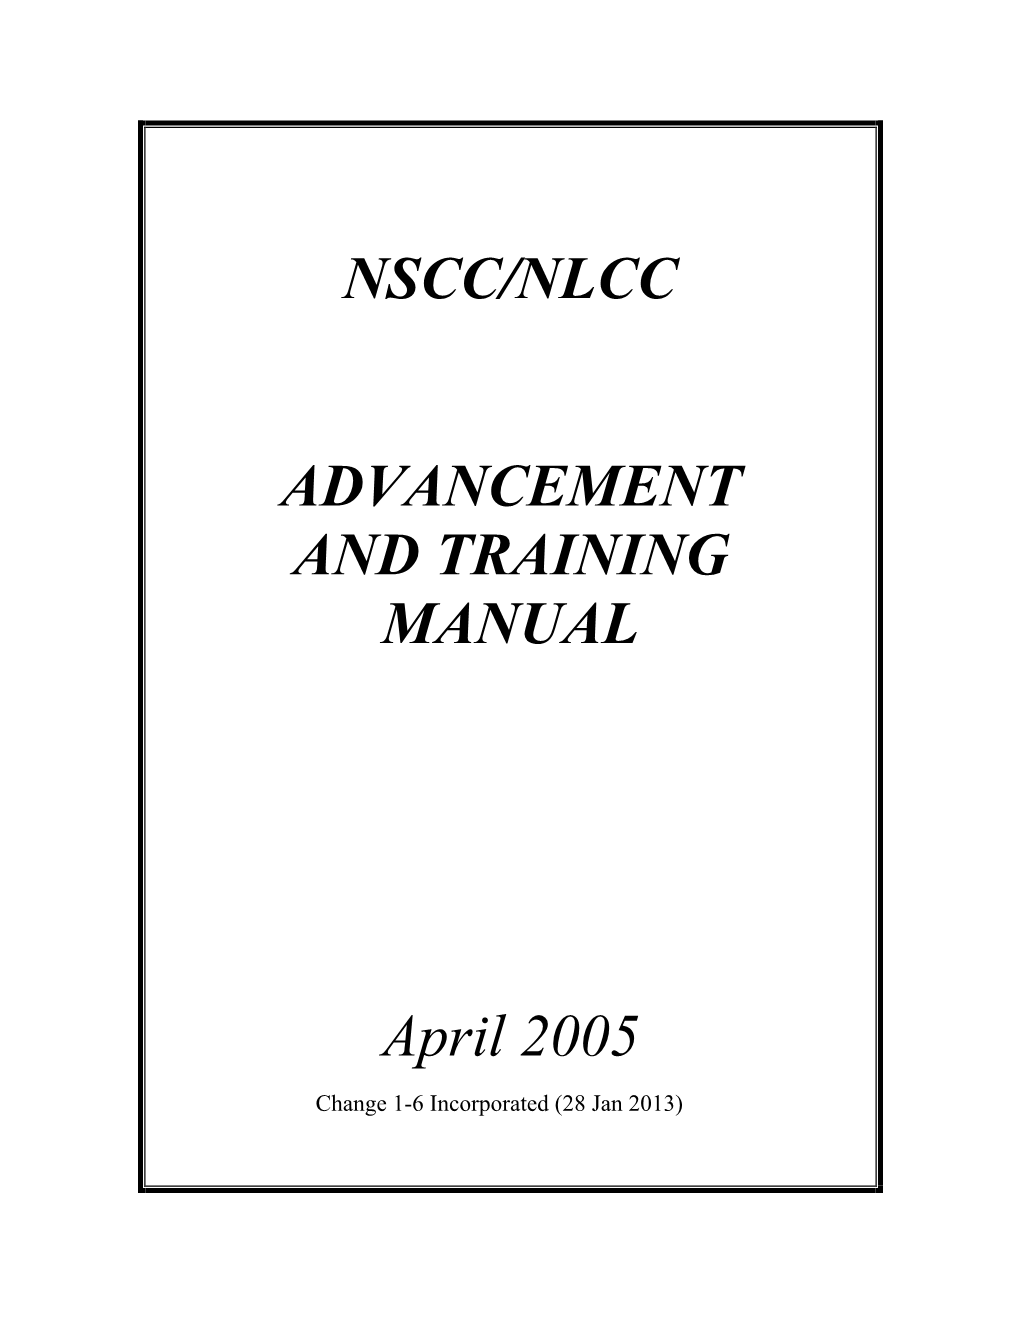 Advancement and Training Manual